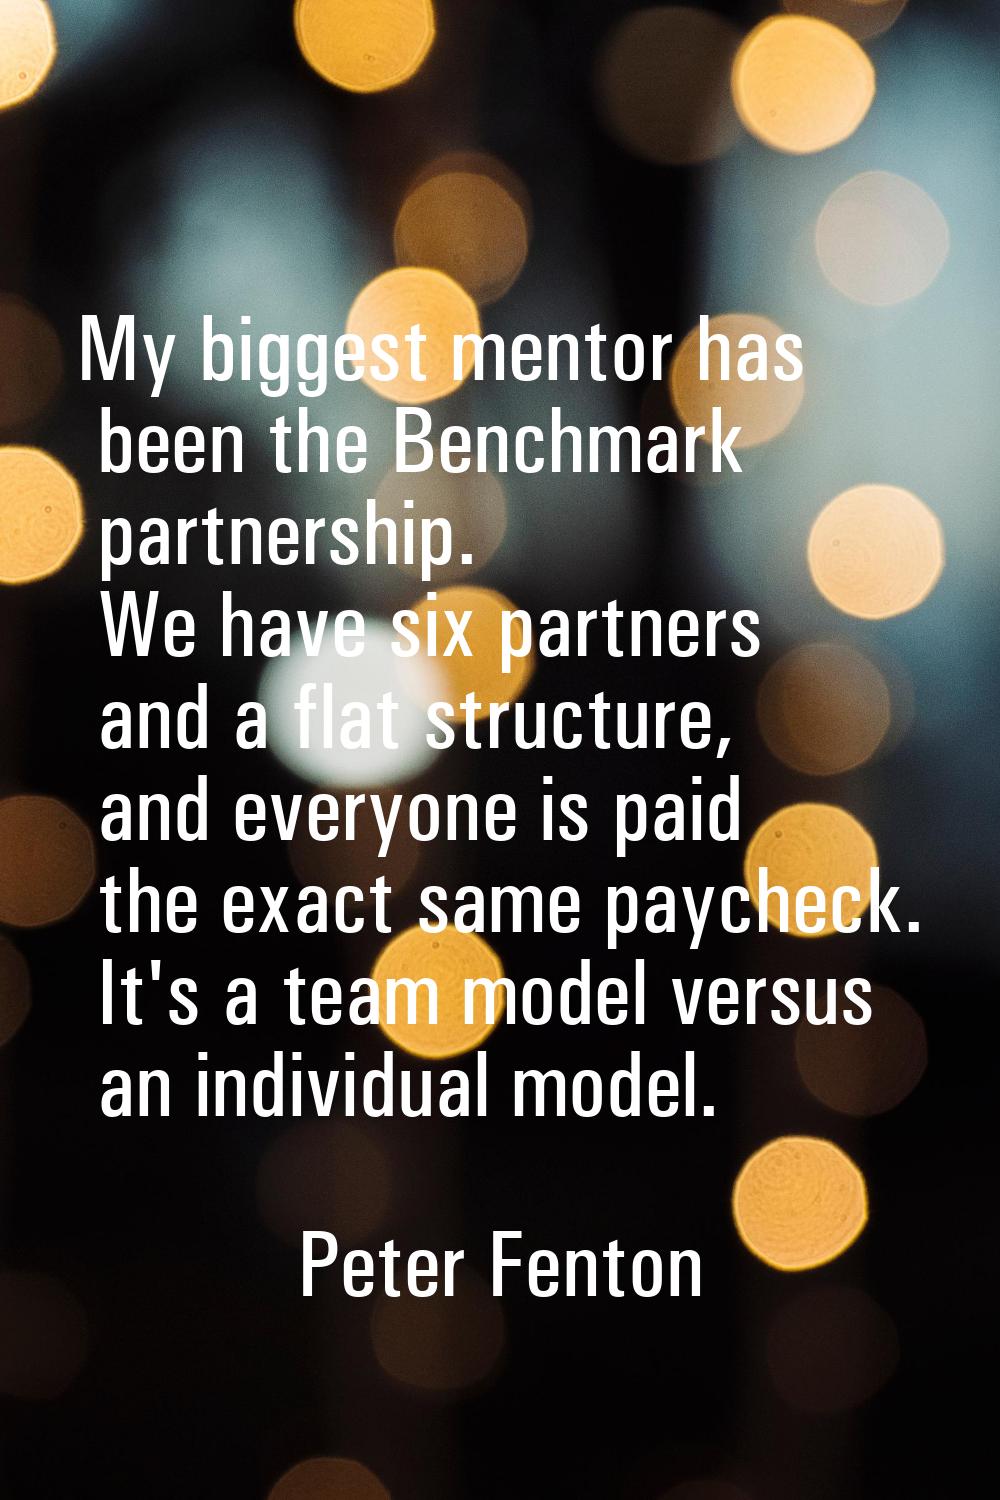 My biggest mentor has been the Benchmark partnership. We have six partners and a flat structure, an